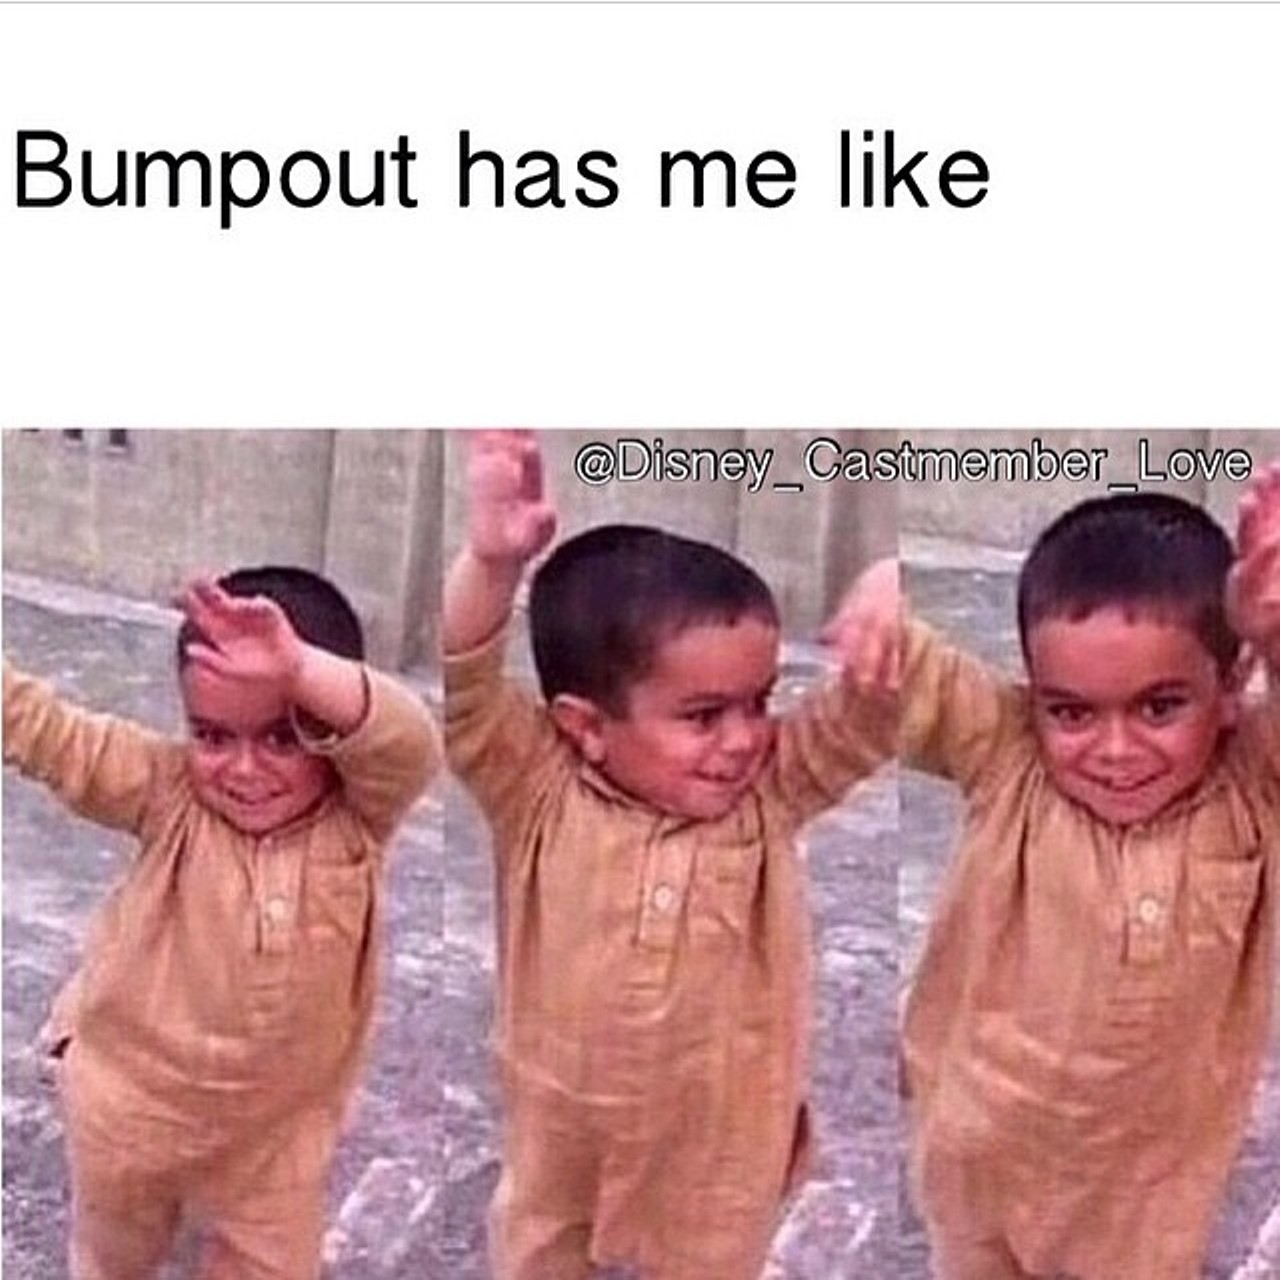 (FYI: Bumpout is when you're finally done with your shift.)